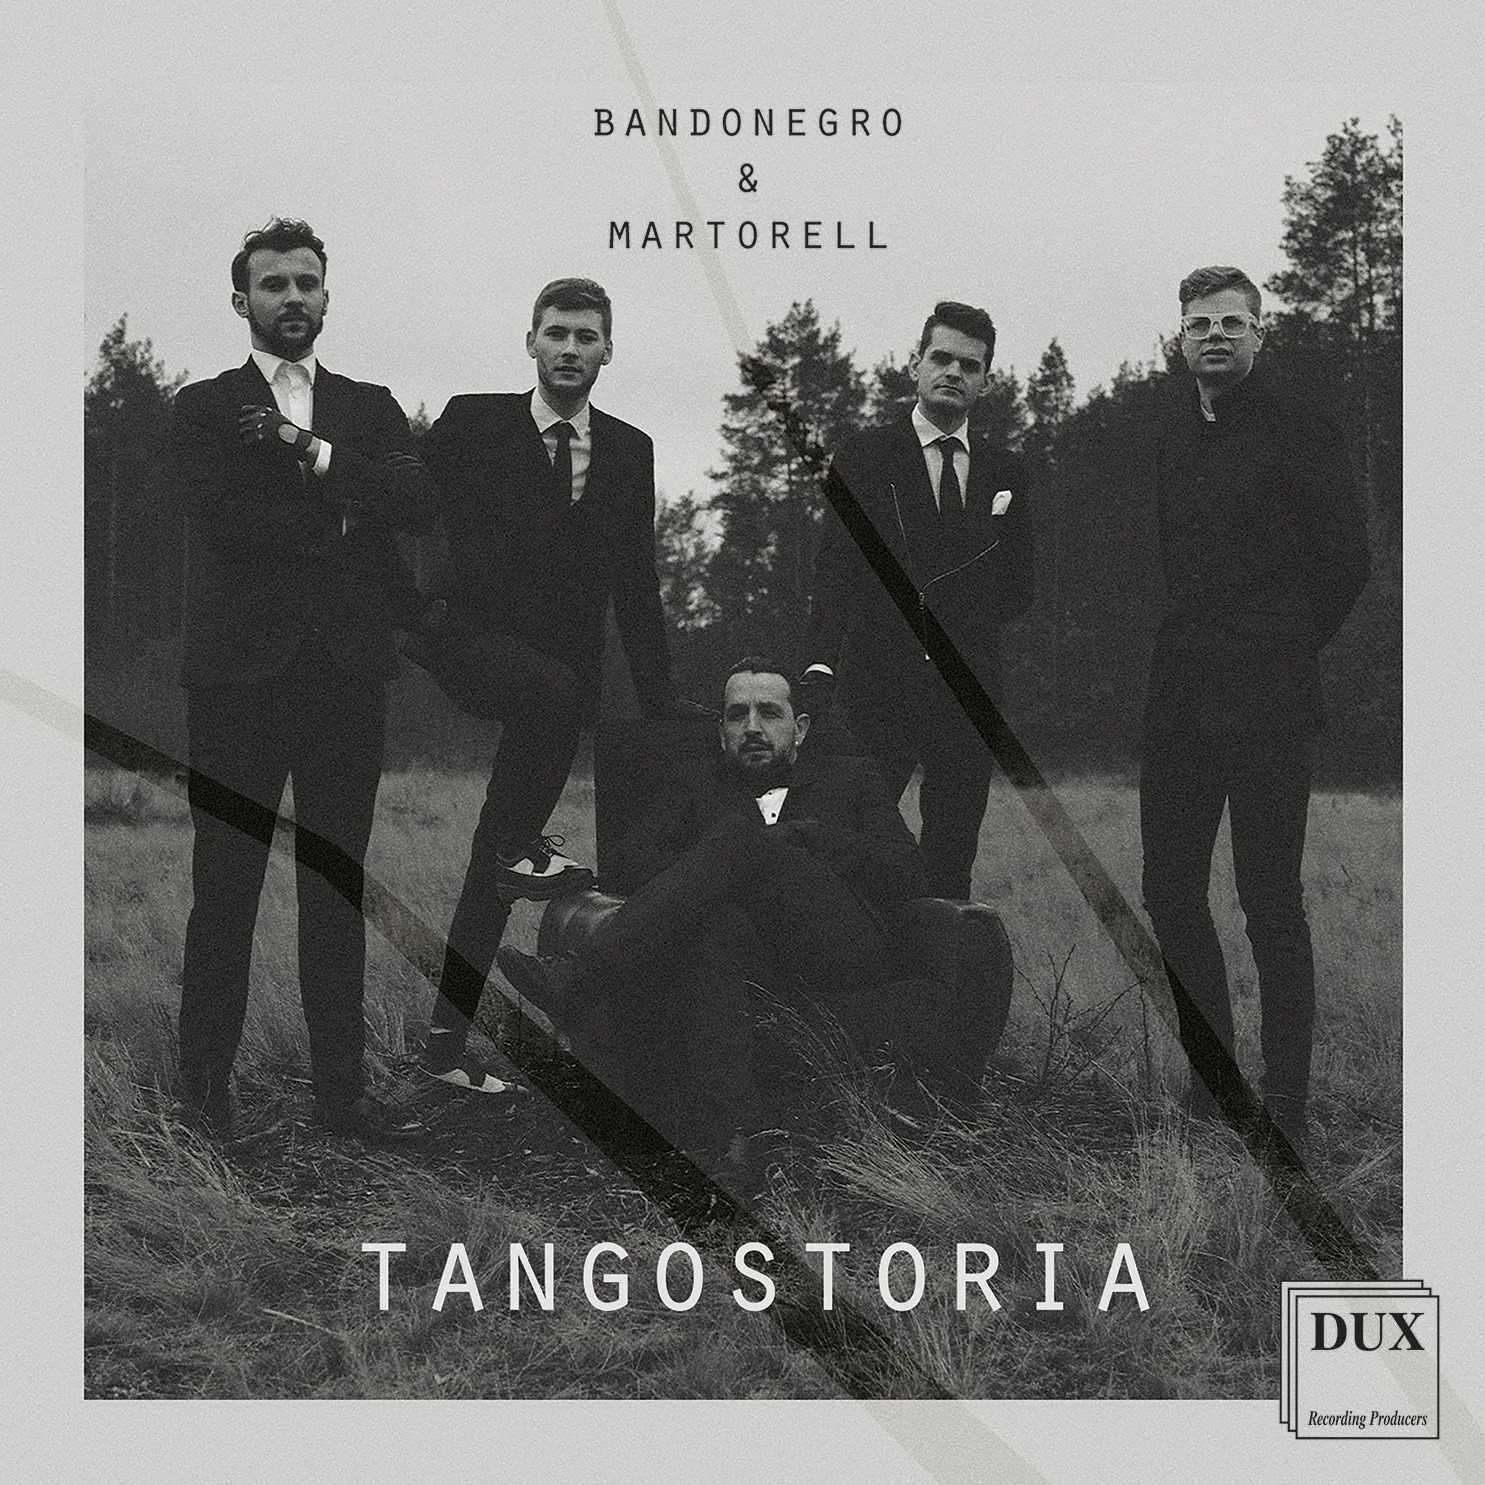 First impressions: Tangostoria by Bandonegro